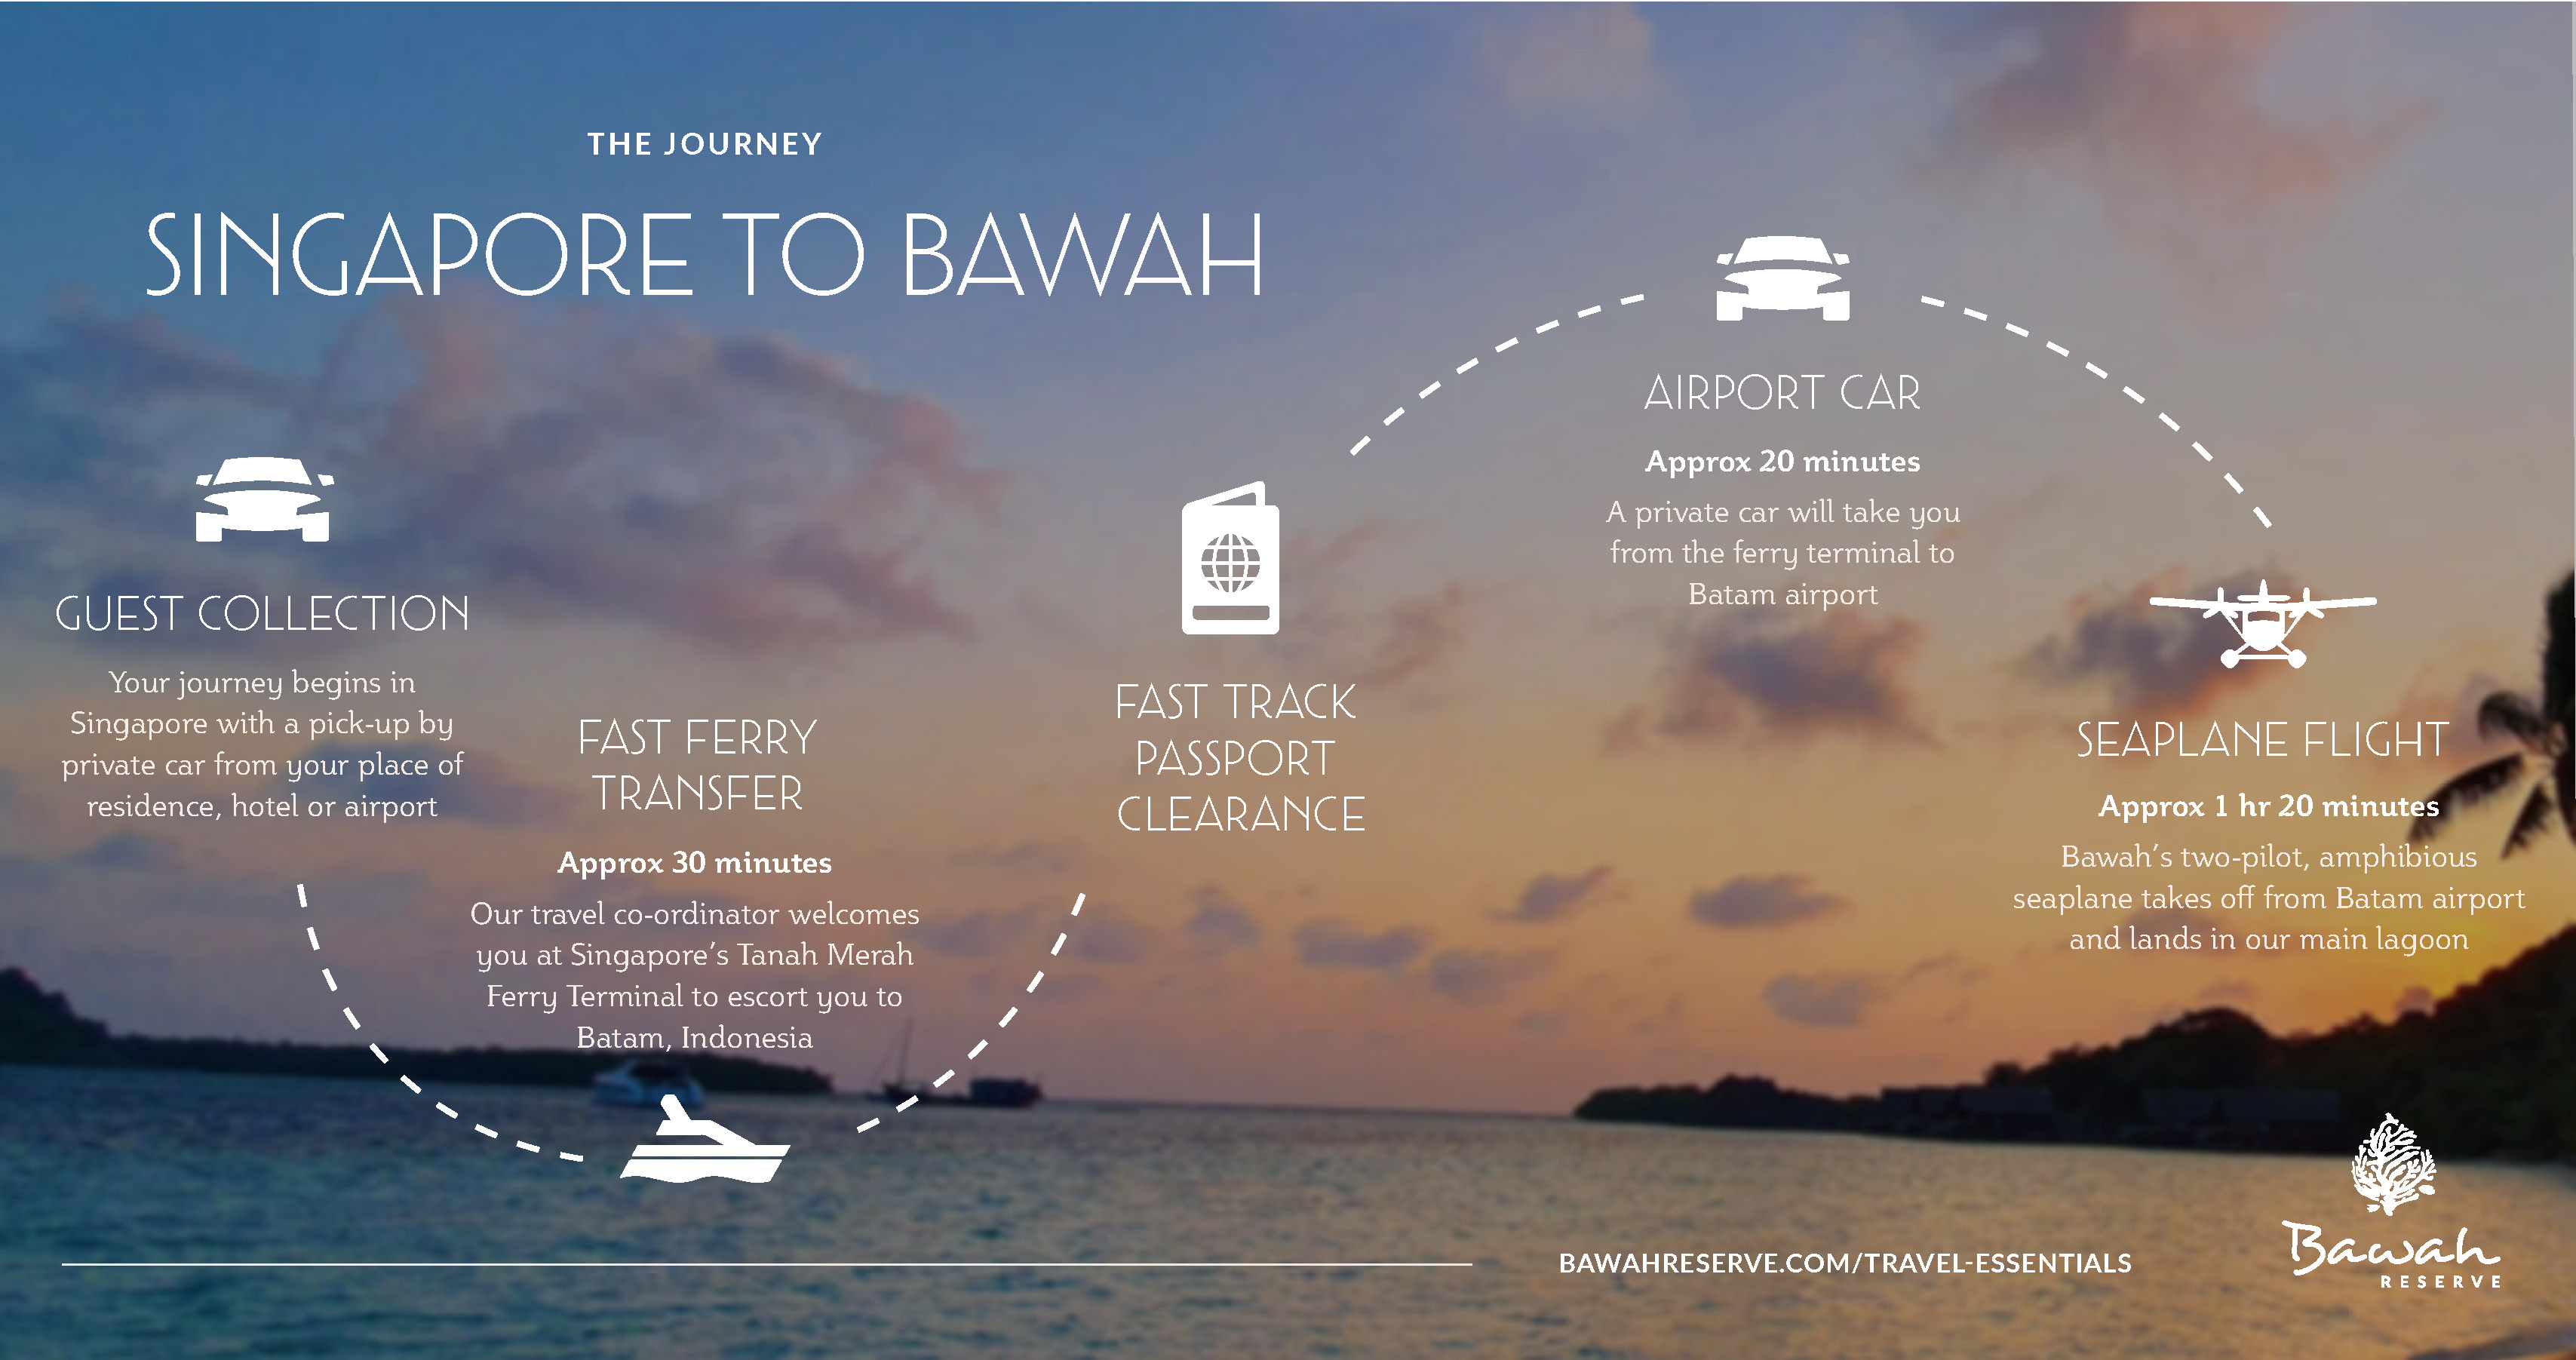 How to get to Bawah Reserve from Singapore